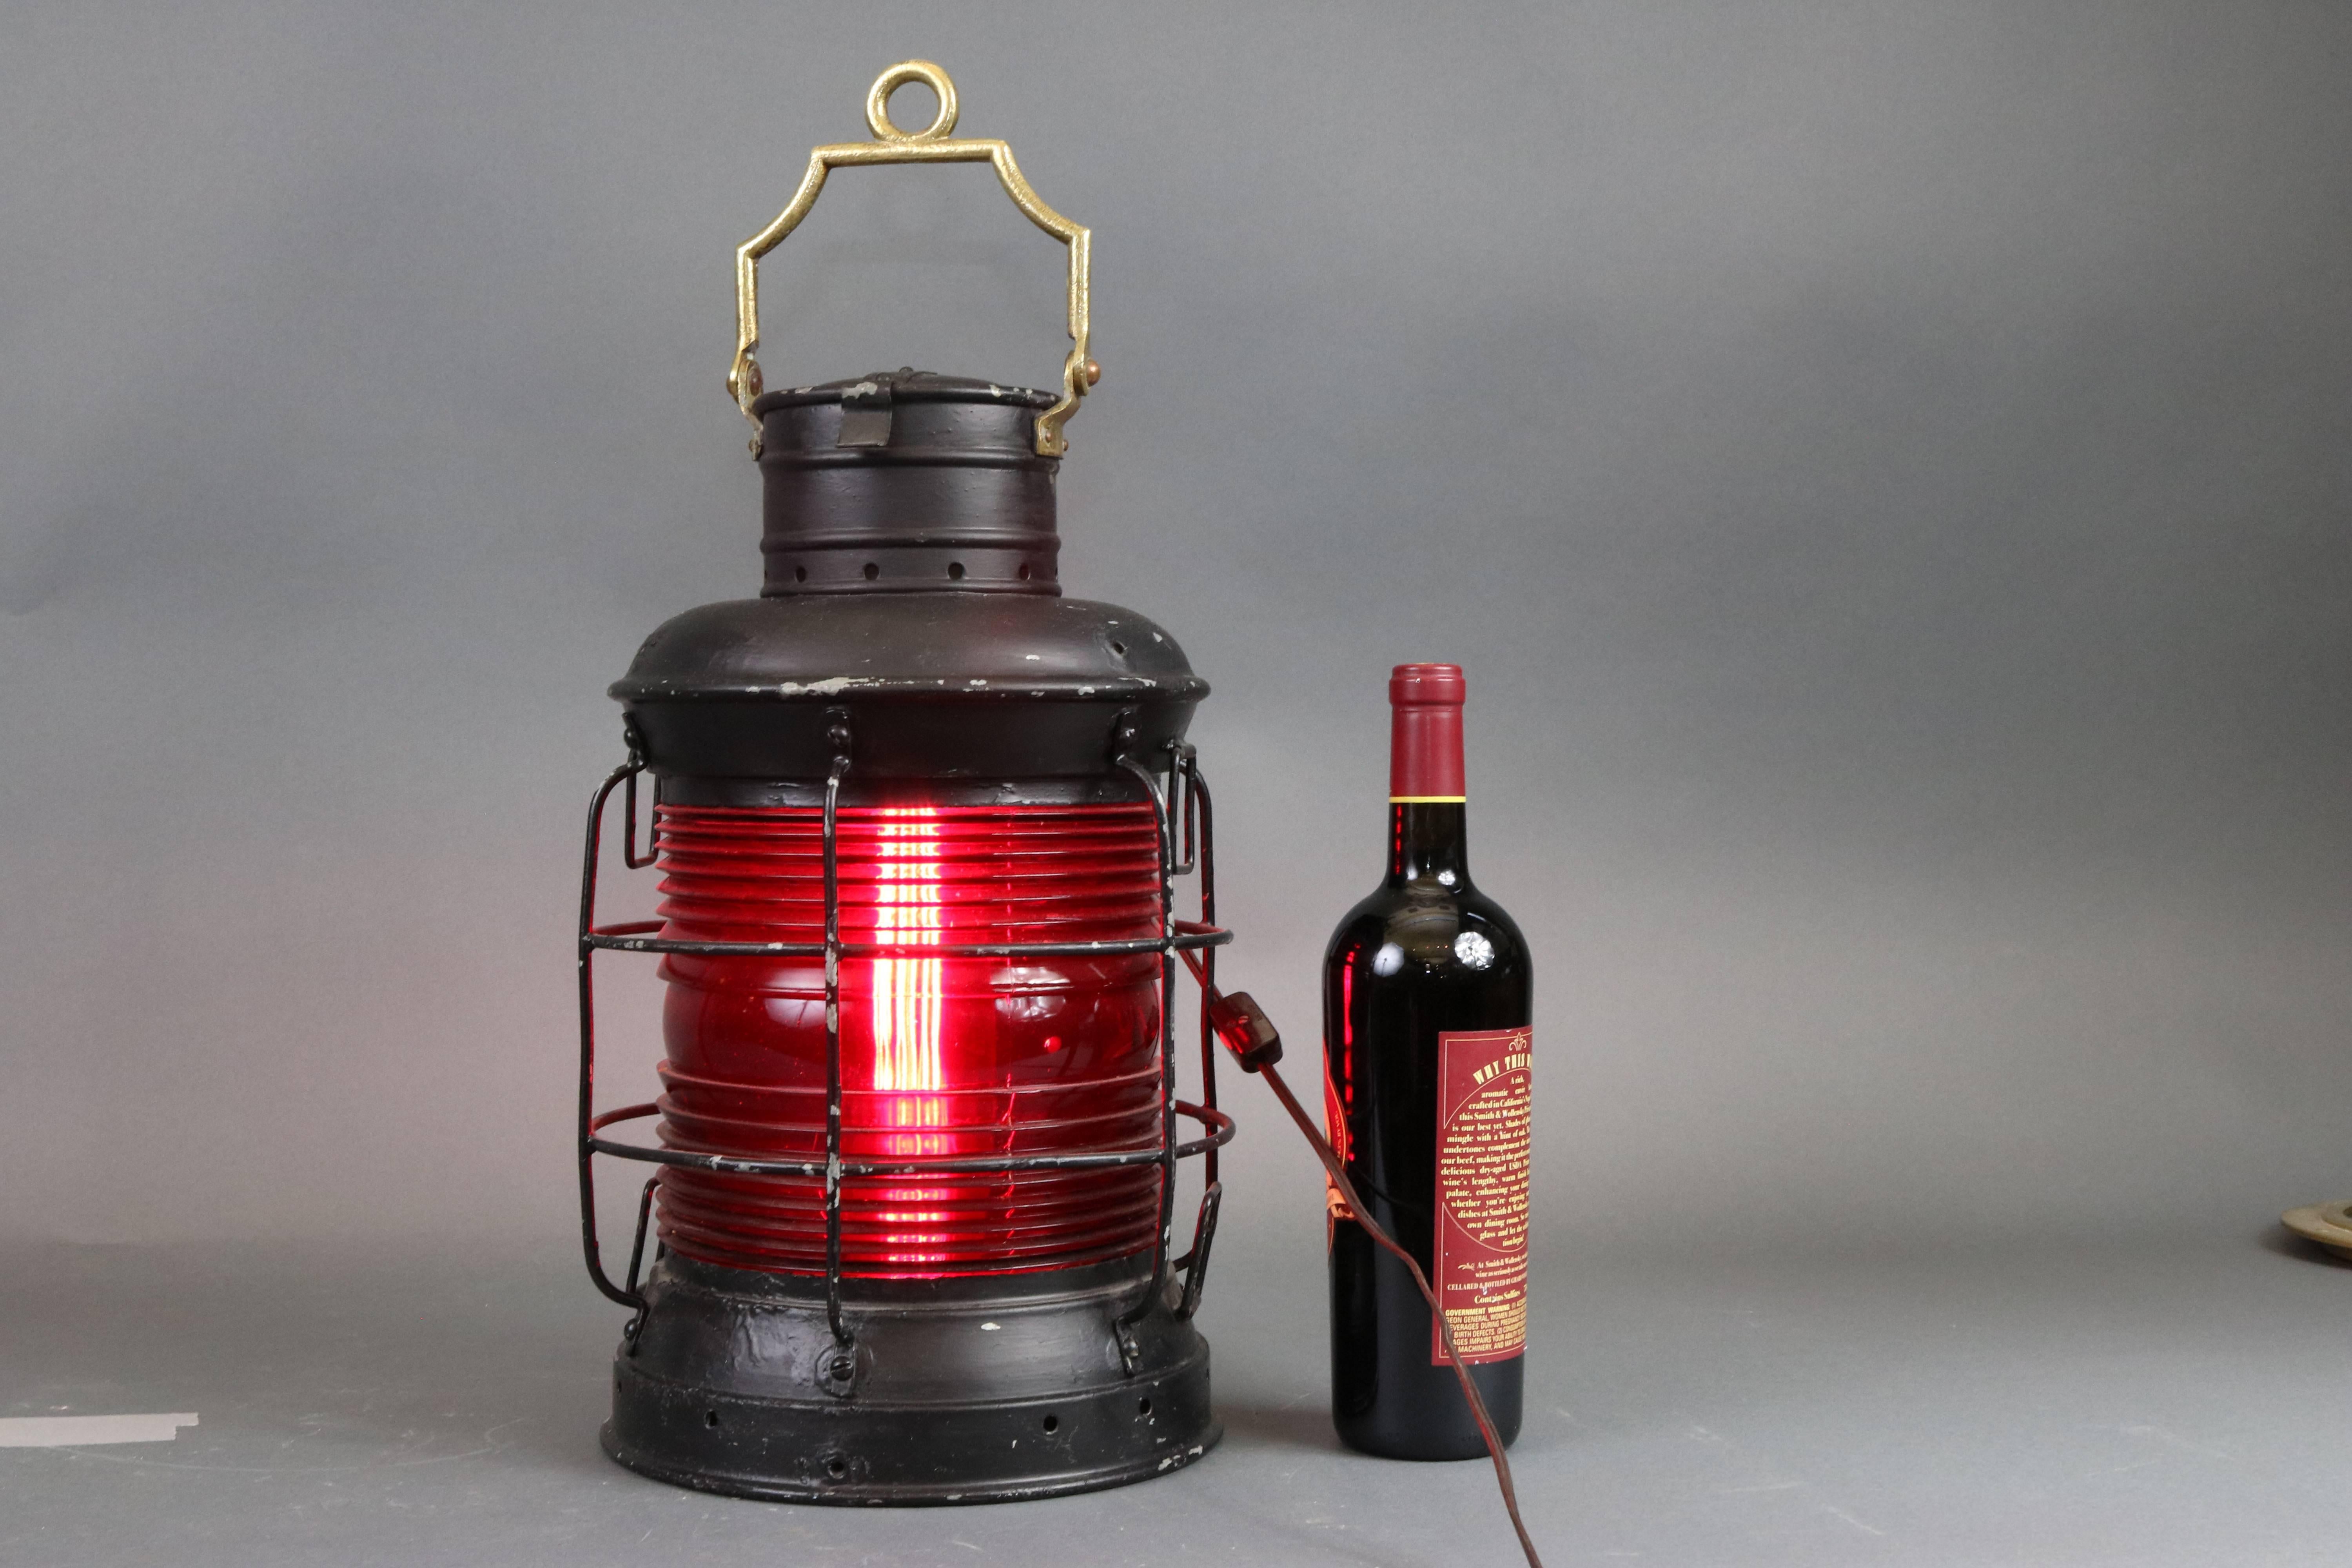 Sturdy old ship's lantern with red Fresnel lens, protective cage, tether rings, carry handle and etc. Dimensions: 10.5" diameter x 7" height (without handles).